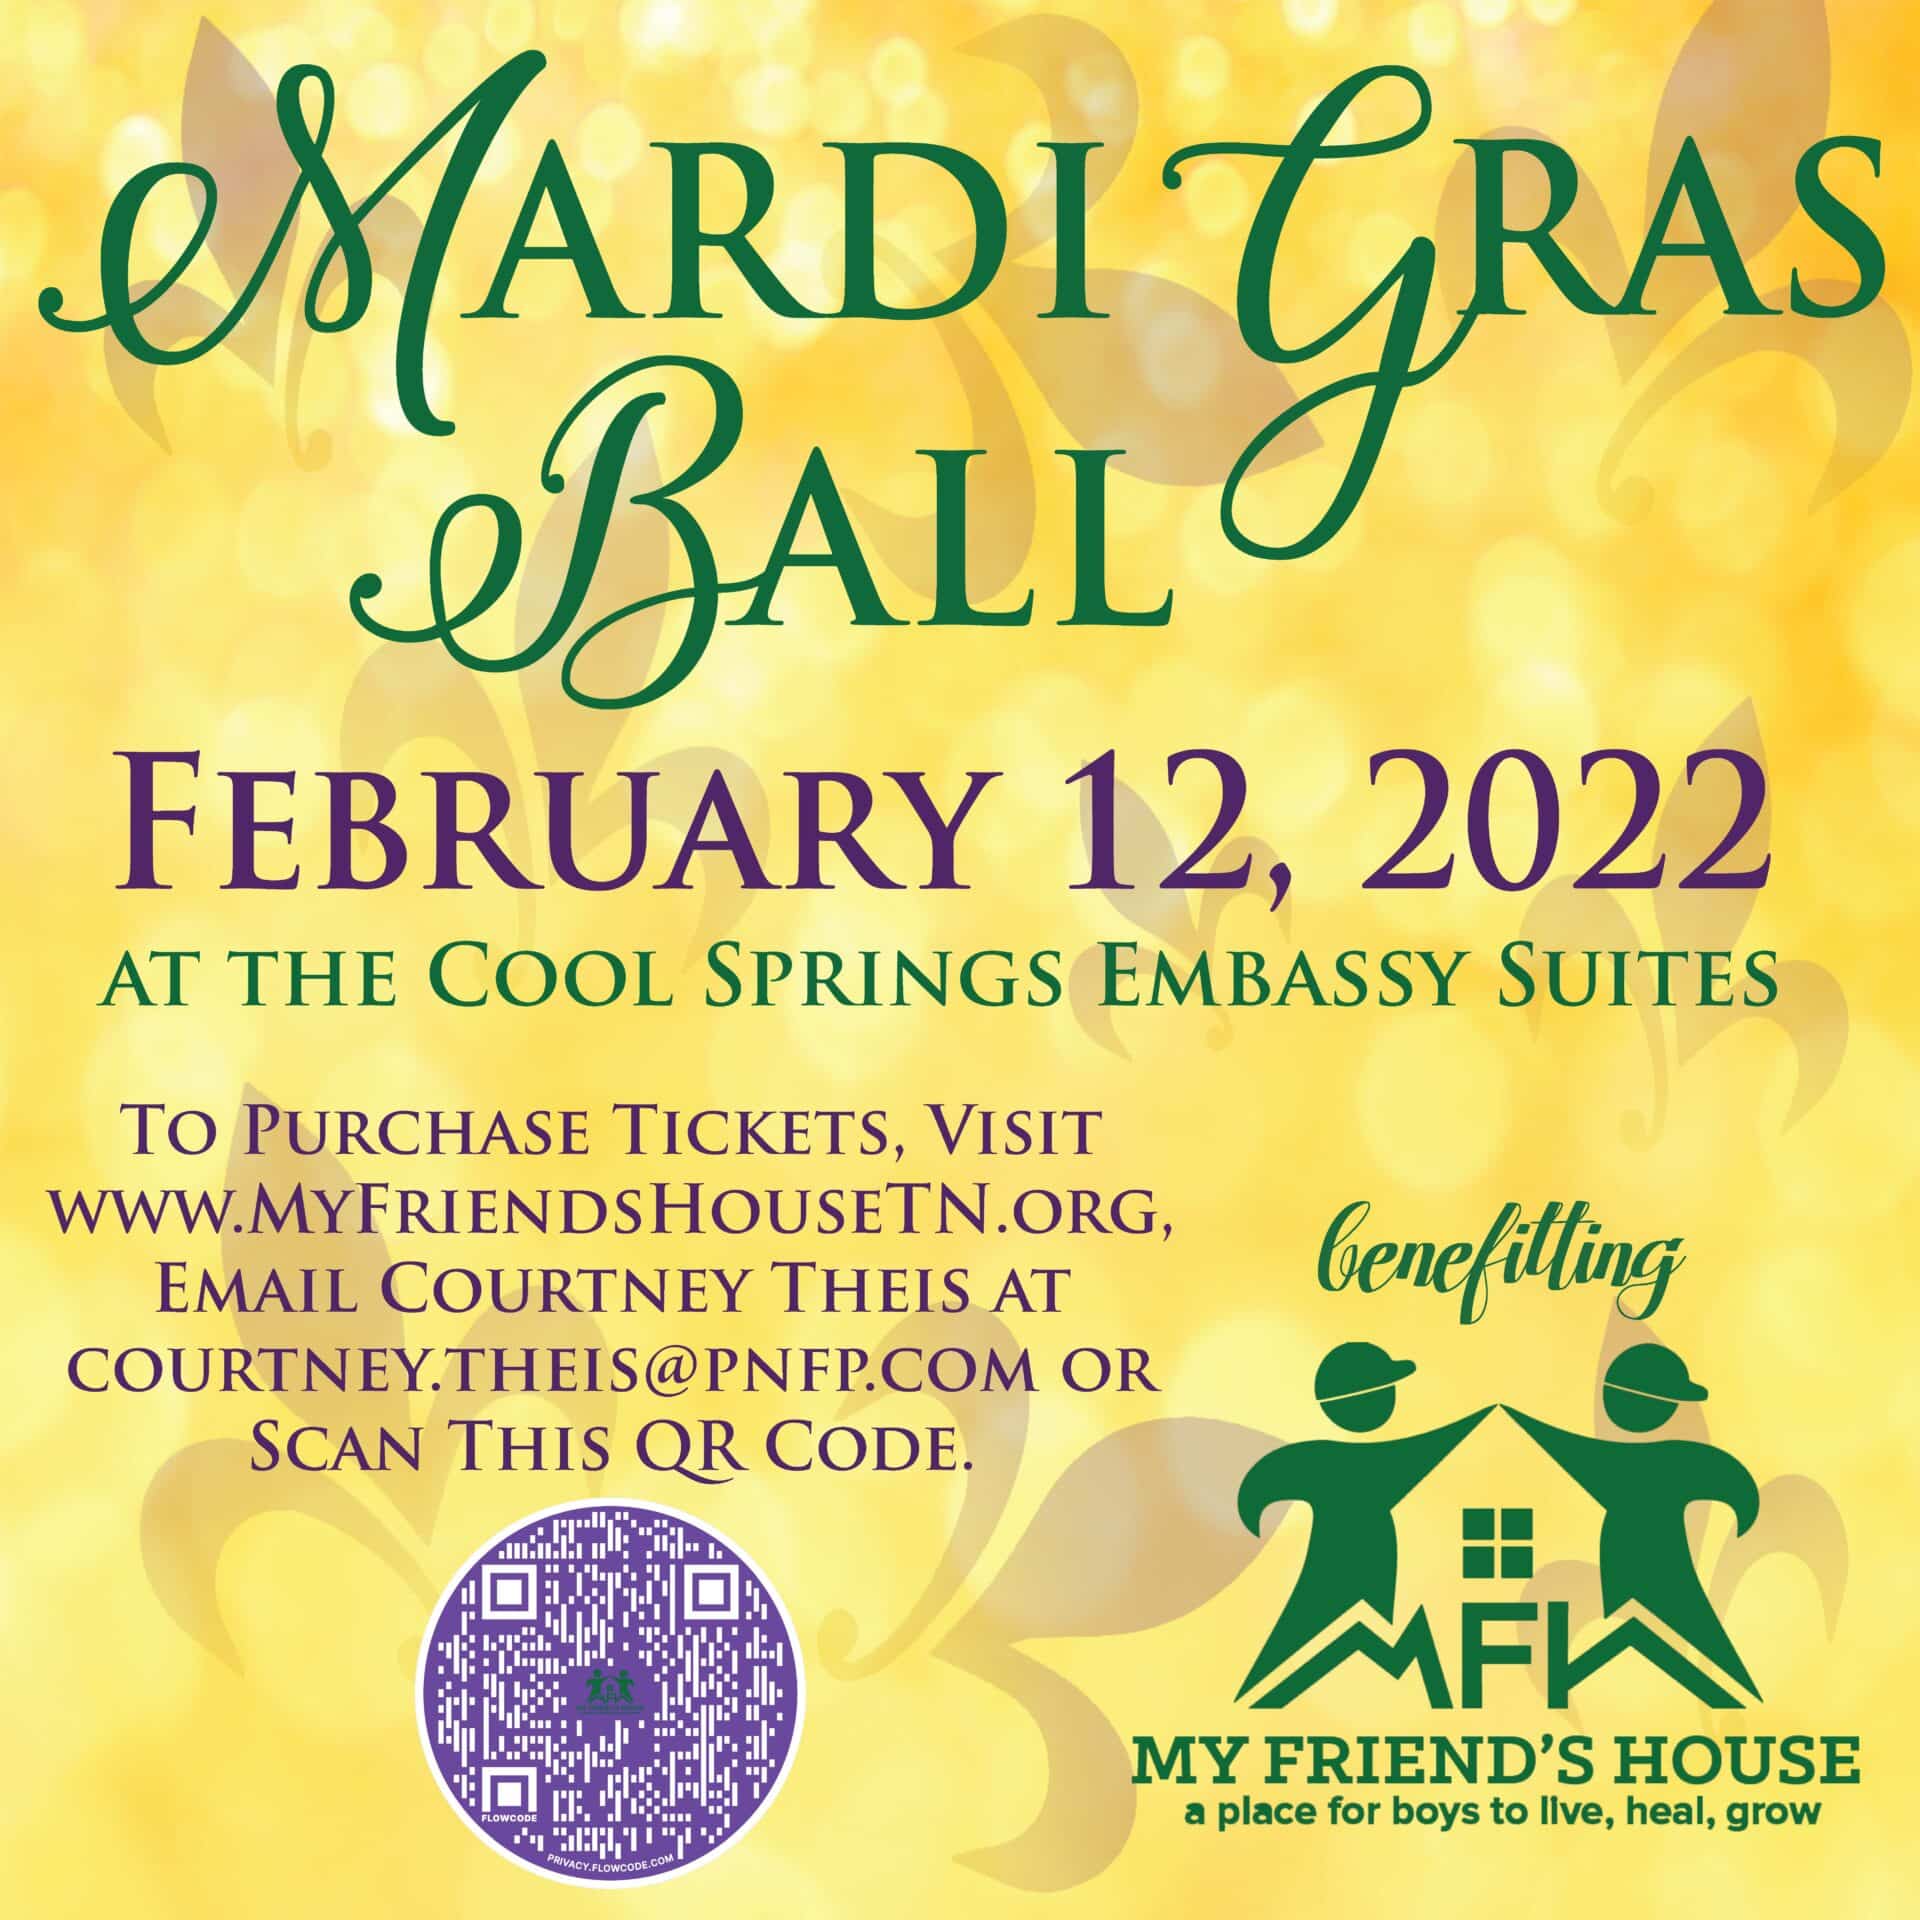 Mardi Gras Ball, a Franklin, Tenn event, offers a four-course dinner and dancing with live music provided by Music City Rhythm Revue, a seven-piece band led by Vince Wynn.